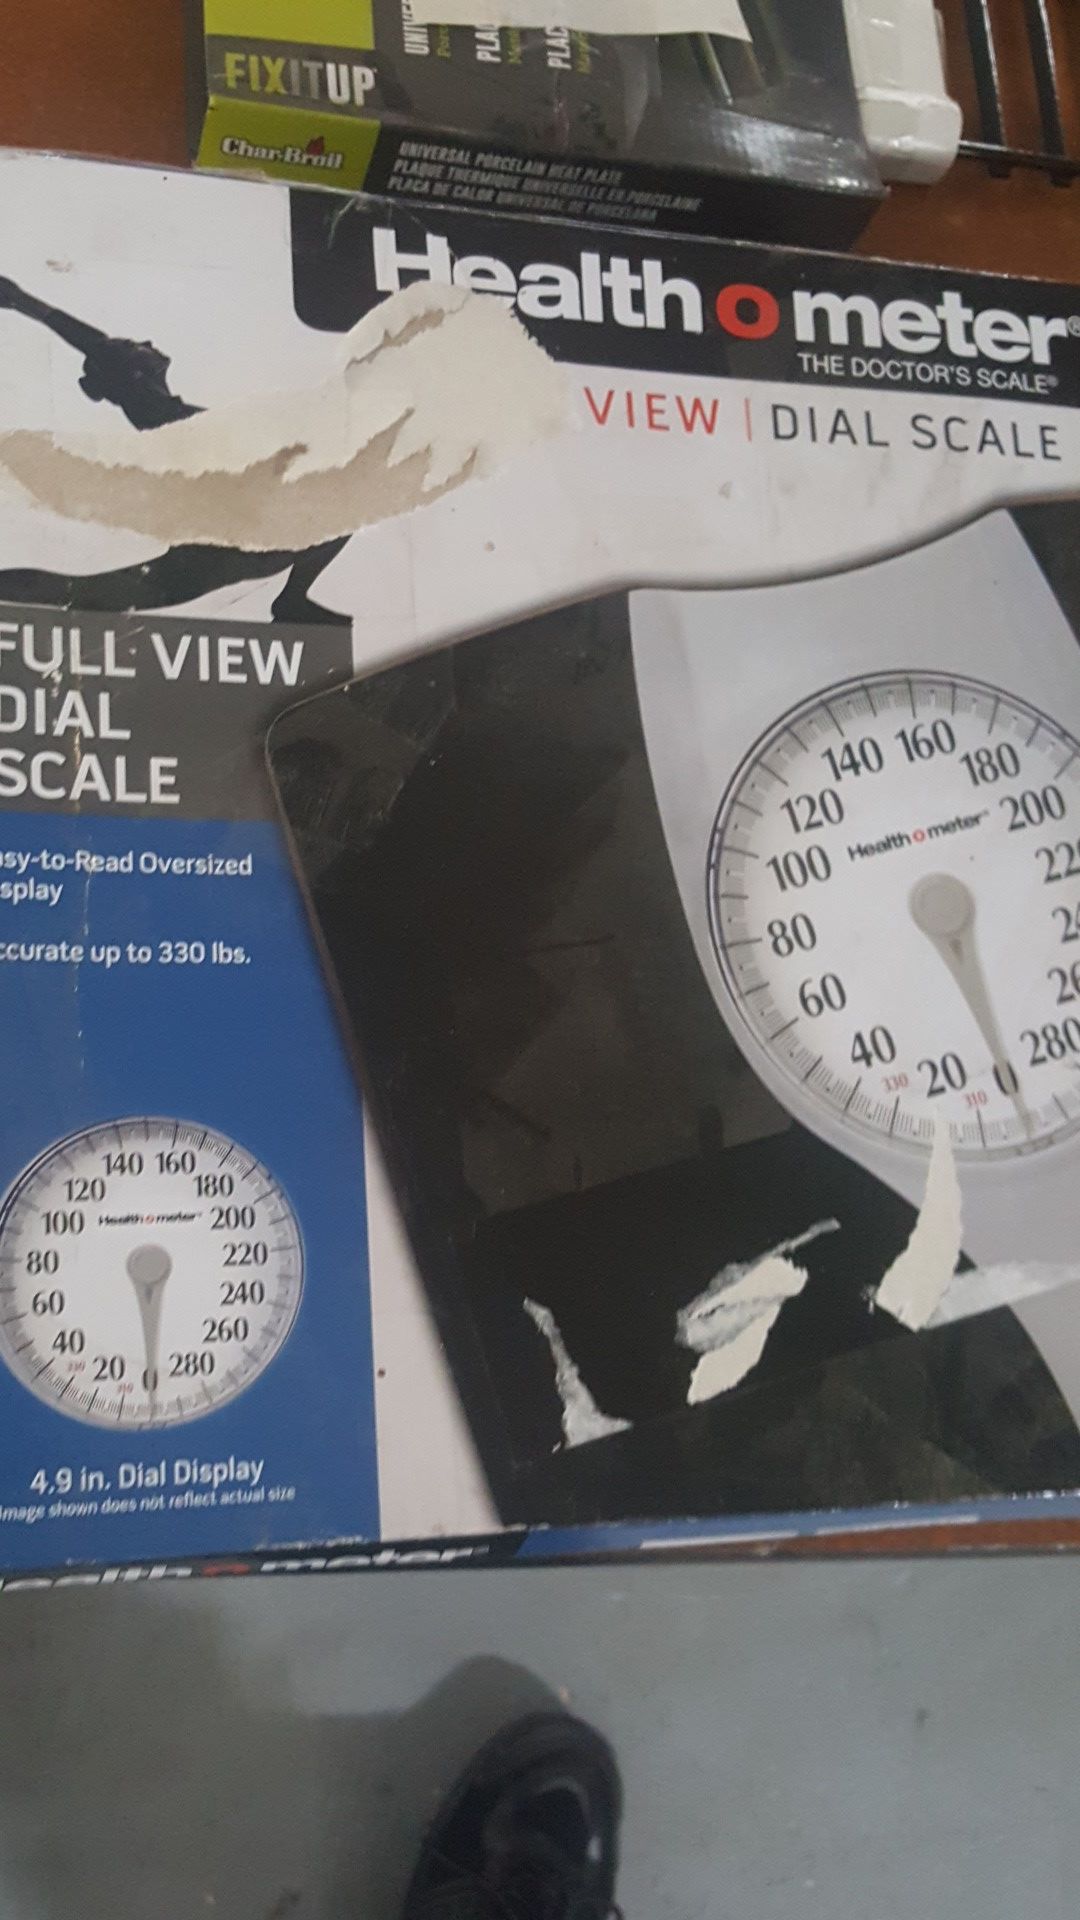 Health o meter view dial scale